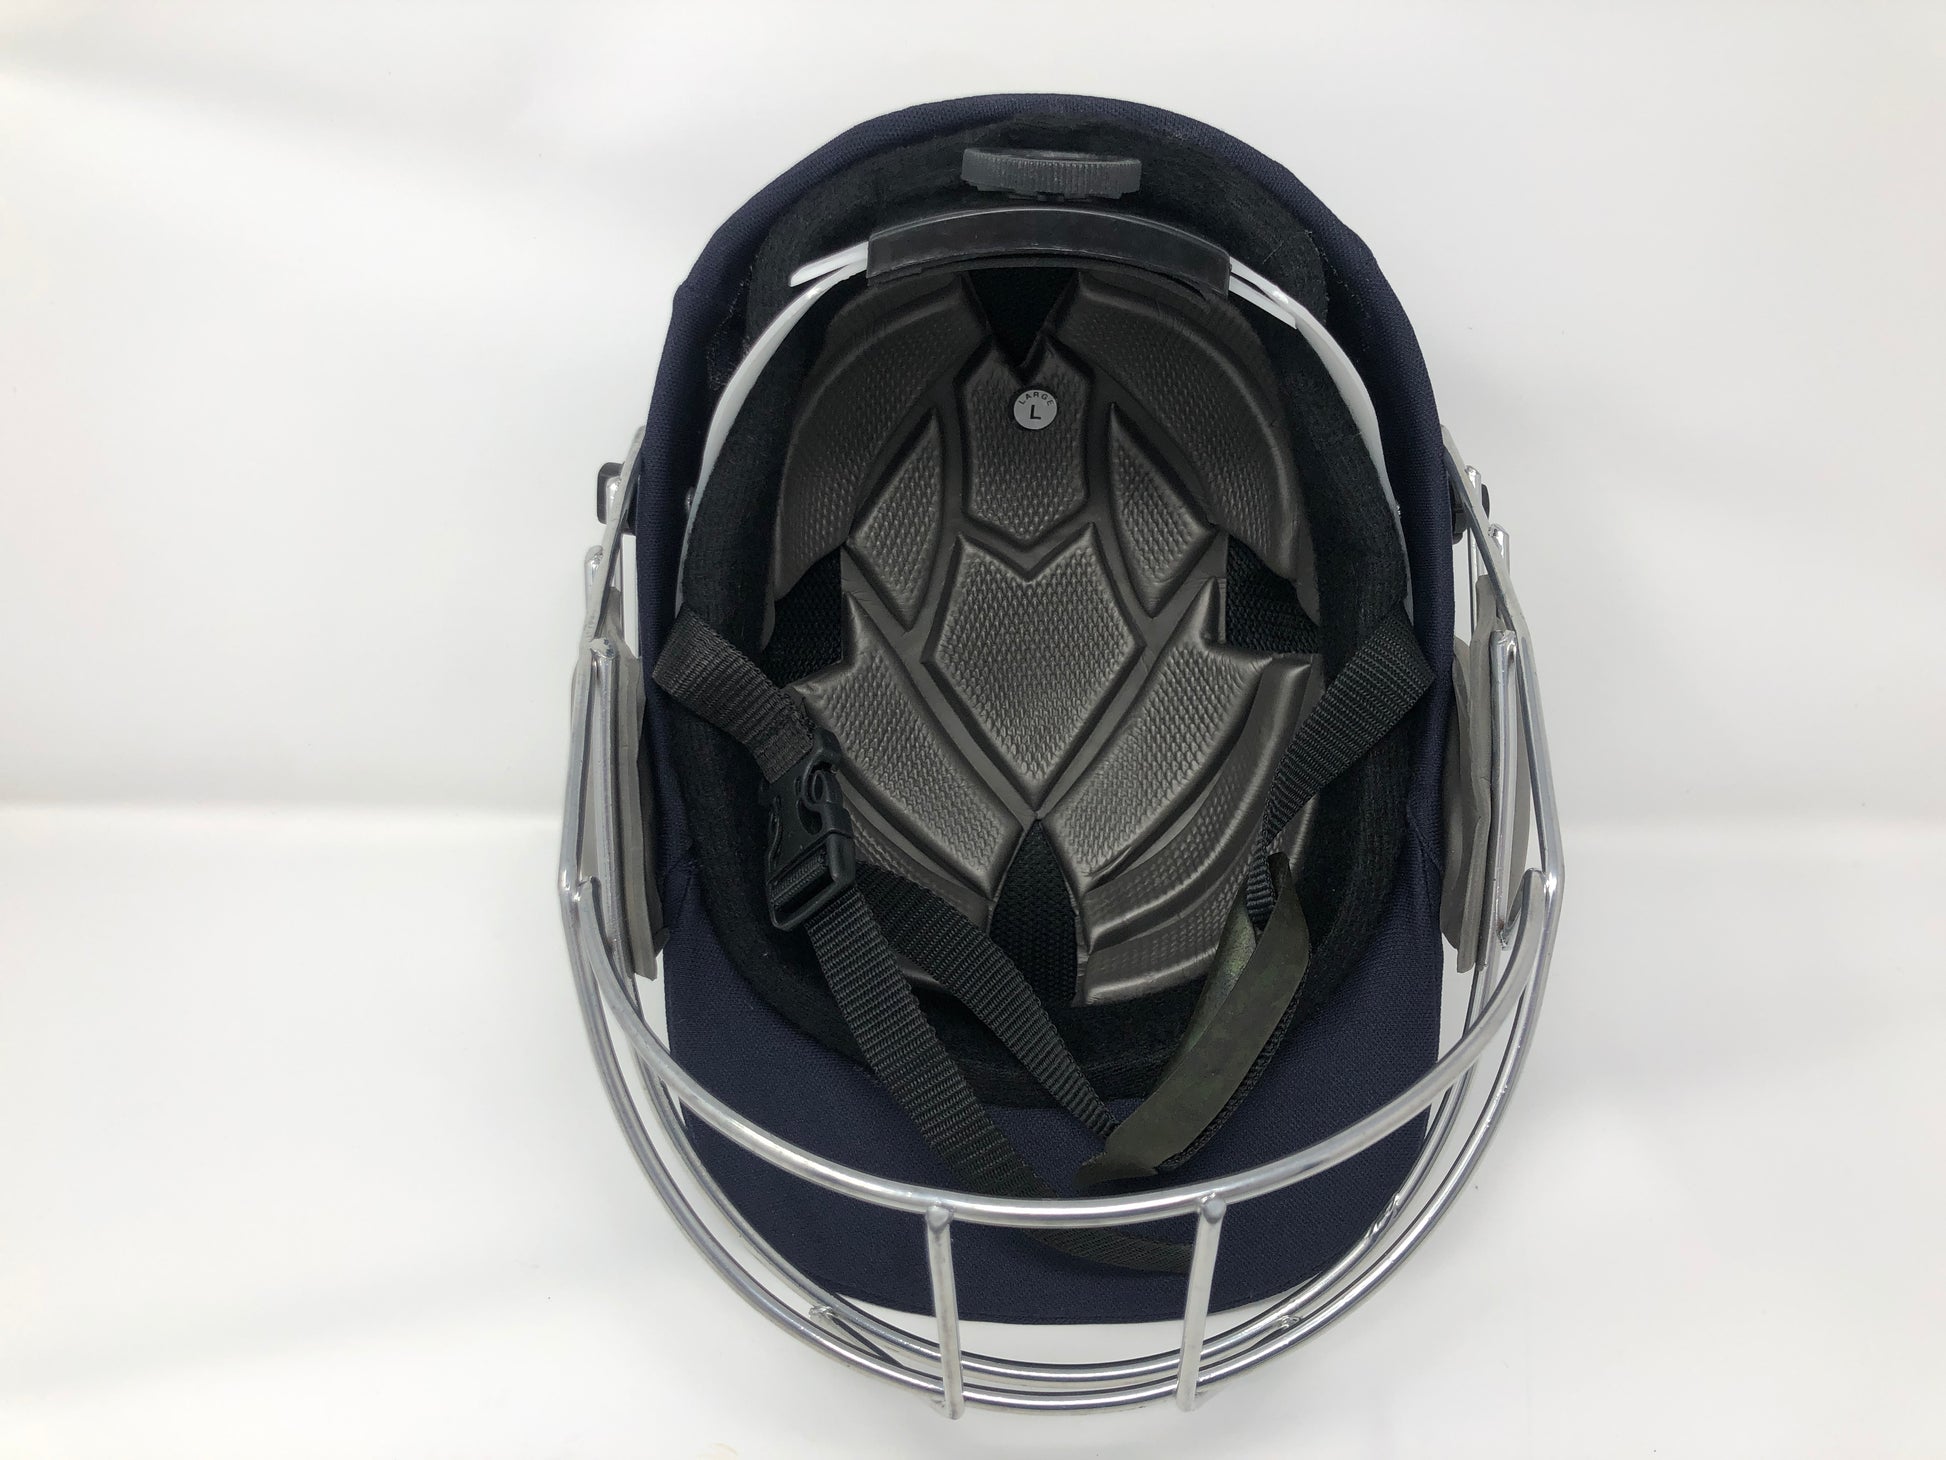 Black Ash custom adjustable helmet with a high impact polypropylene shell and chrome finish steel grill, offering 8 micro adjustments for optimal protection and visibility, impact-resistant padding, adjustable to fit 52-58 cm, with nape dial adjuster and soft ear protection.